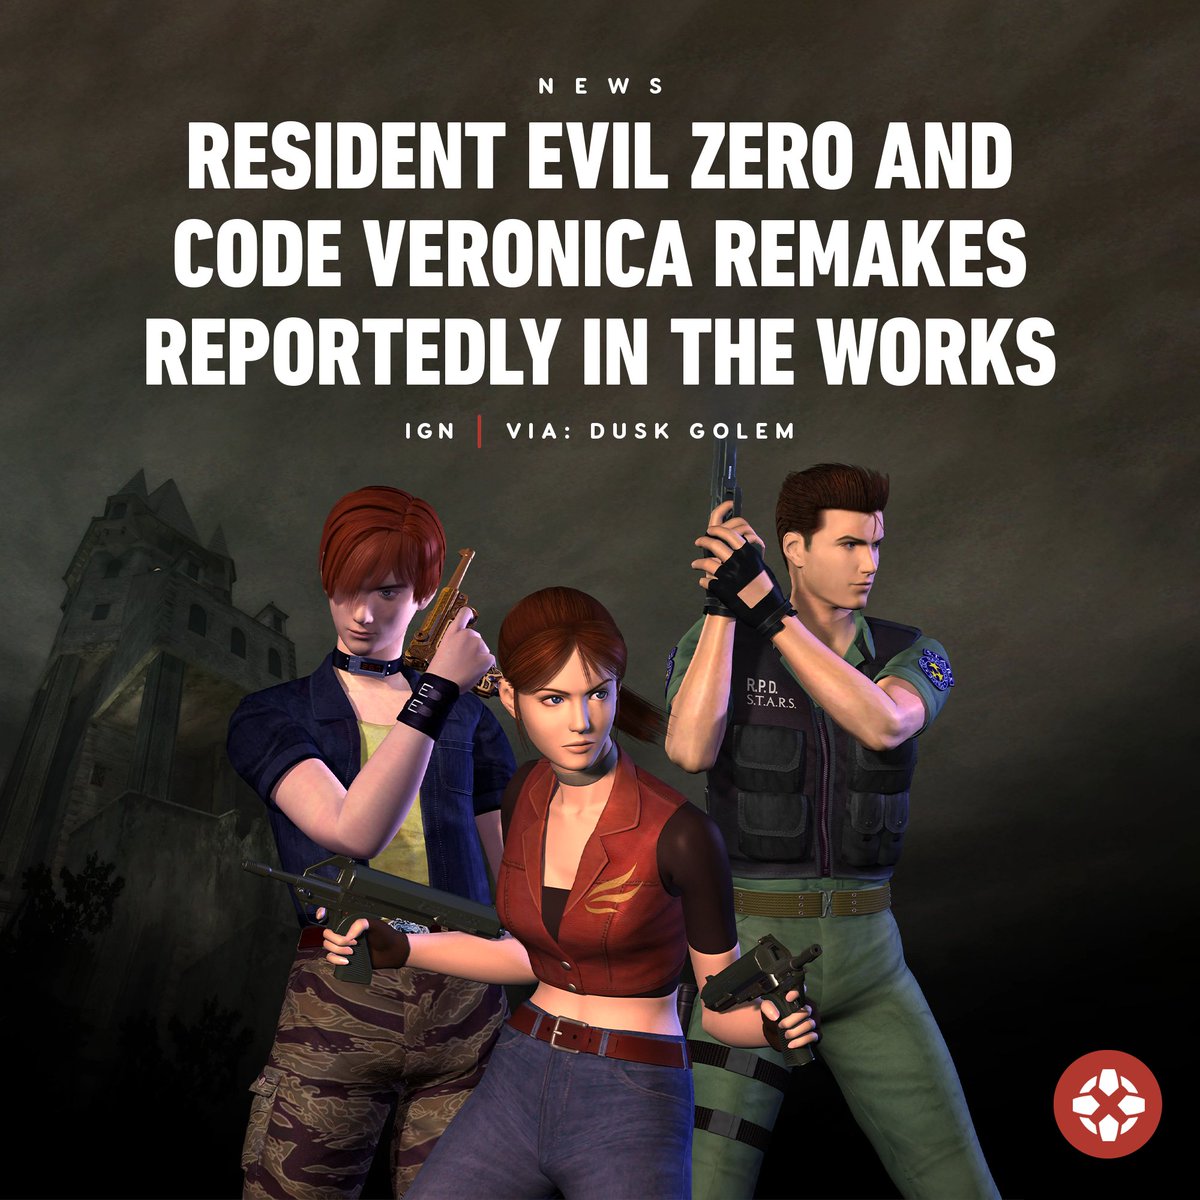 Following the enormous success of the Resident Evil 2, 3, and 4 remakes, Capcom has reportedly turned its attention to remakes of Resident Evil Zero and Code Veronica. bit.ly/3wUtA3r